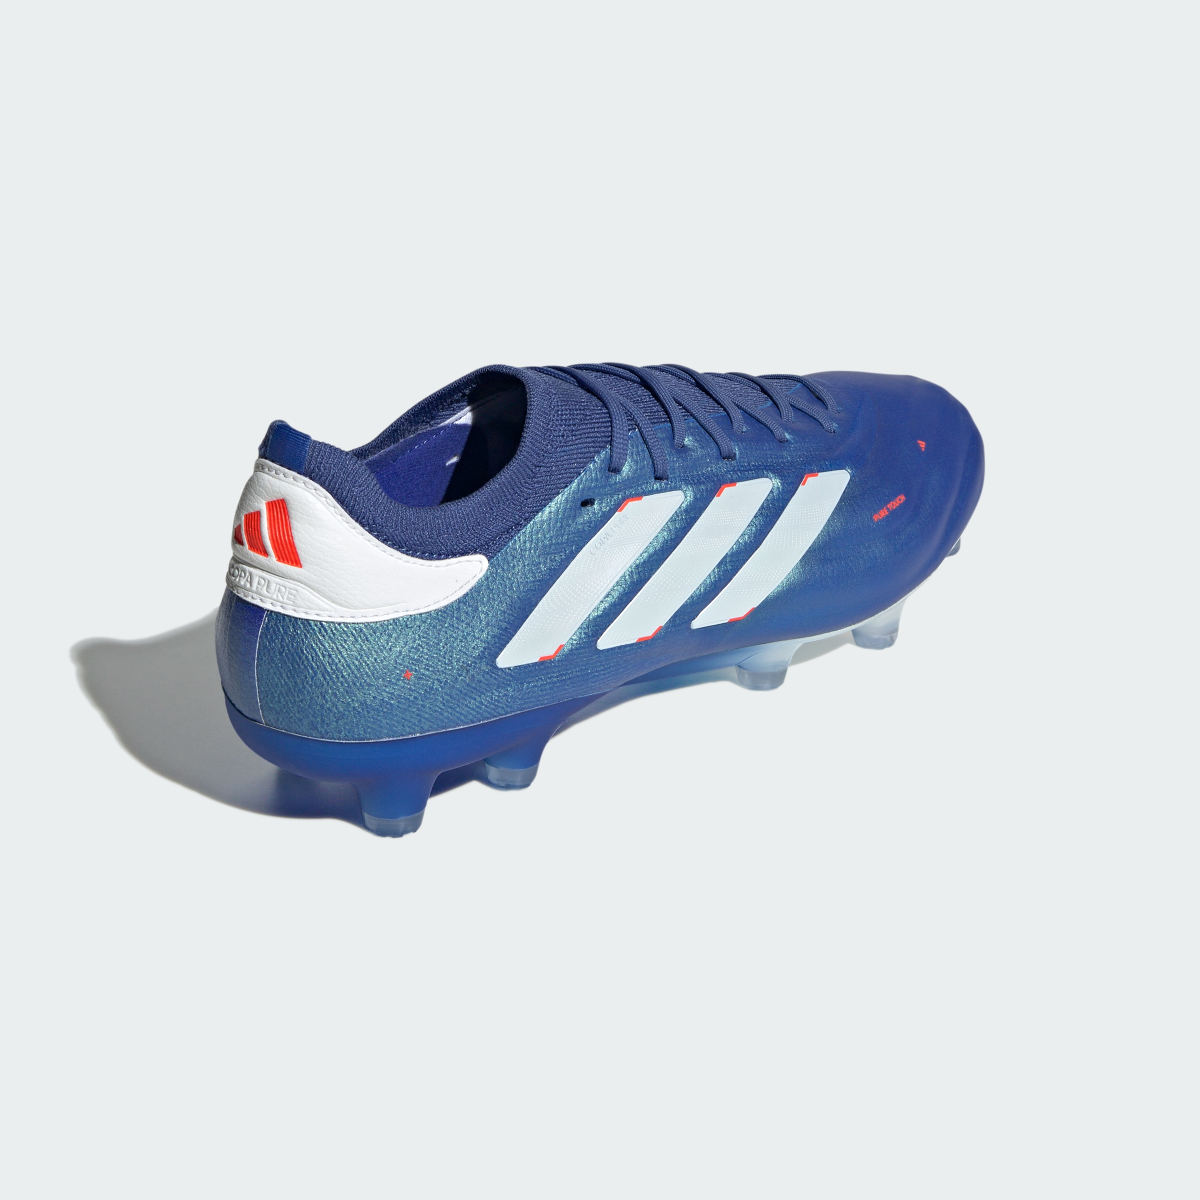 Adidas Copa Pure II+ Firm Ground Boots. 10